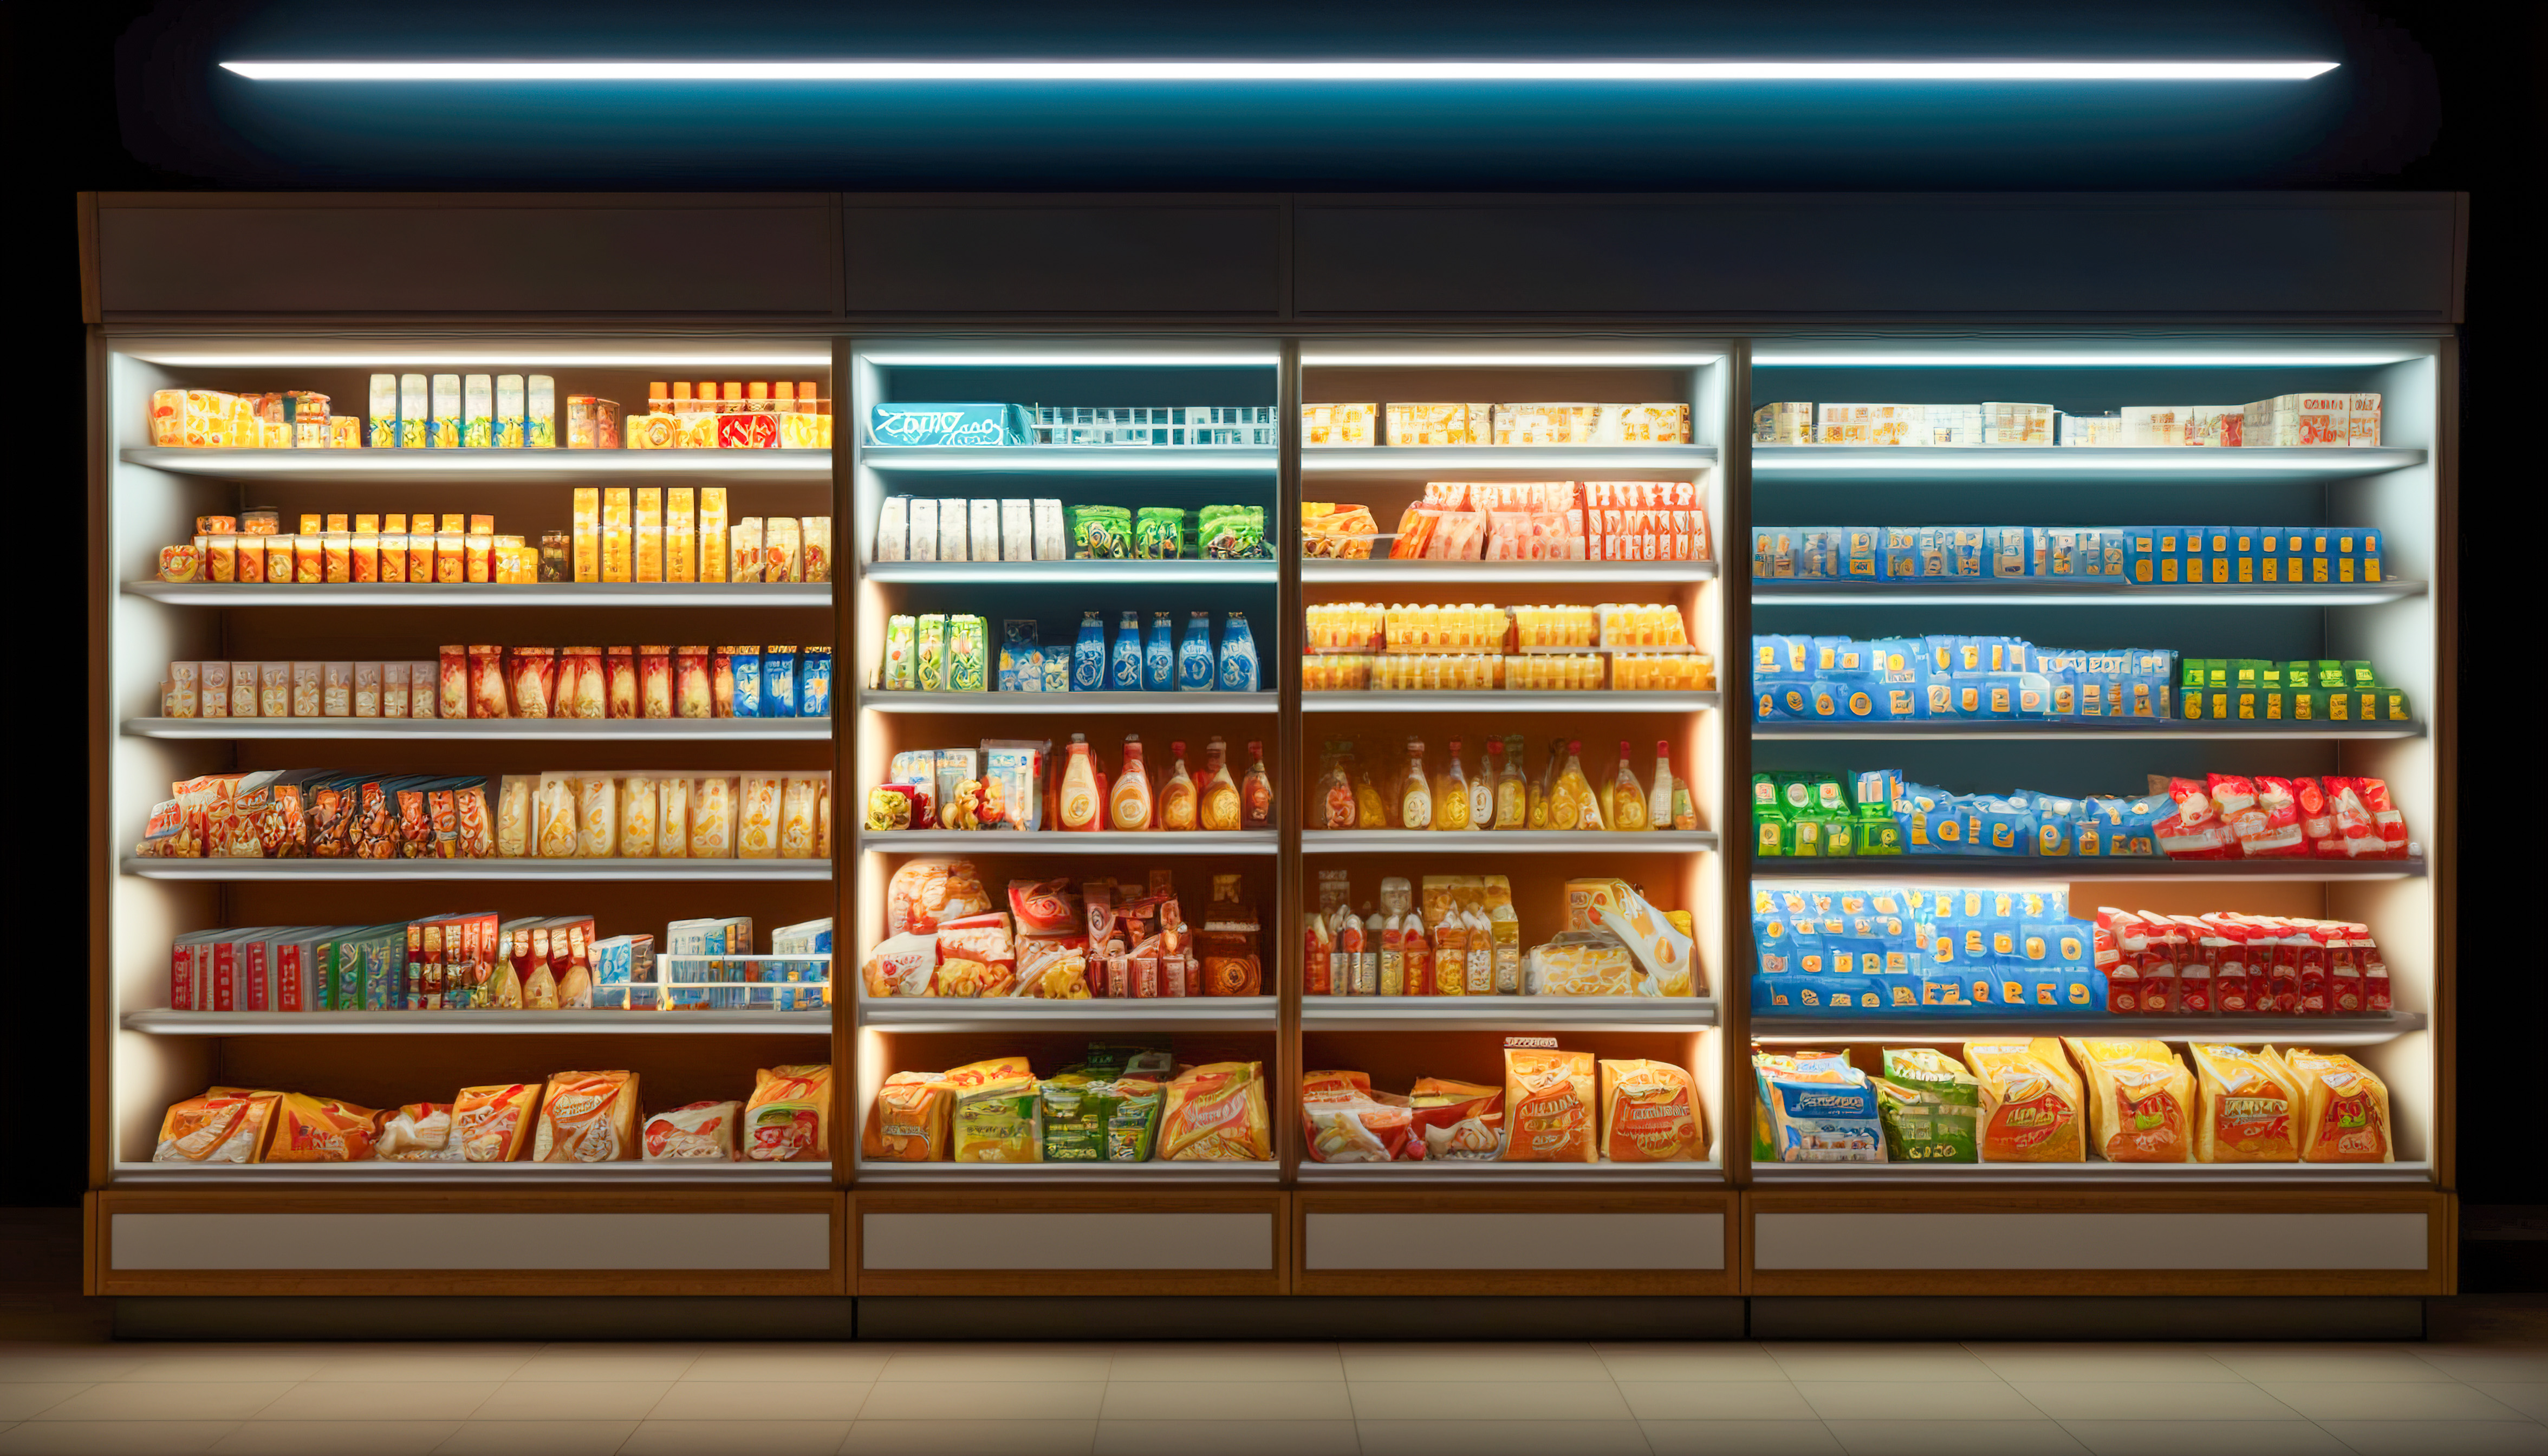 Refrigerated products on shelf in supermarket